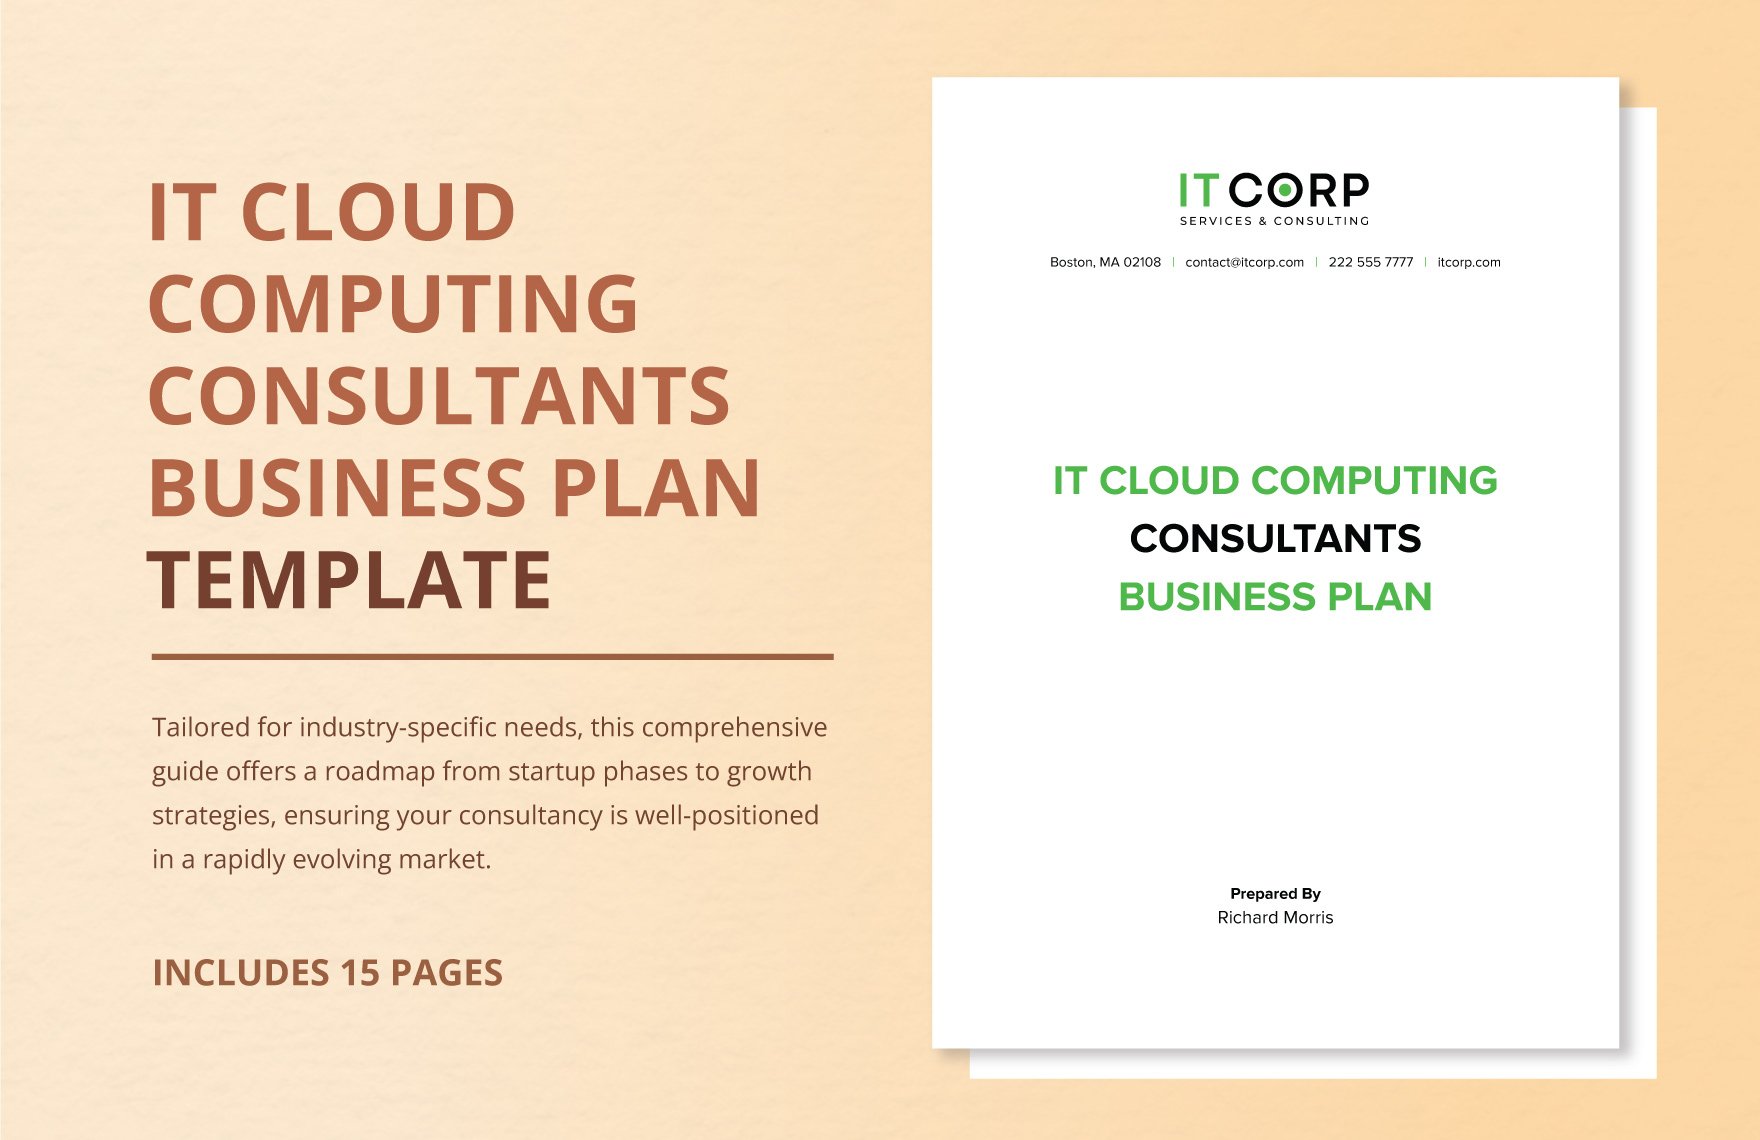 IT Cloud Computing Consultants Business Plan Template in Word, Google Docs, PDF